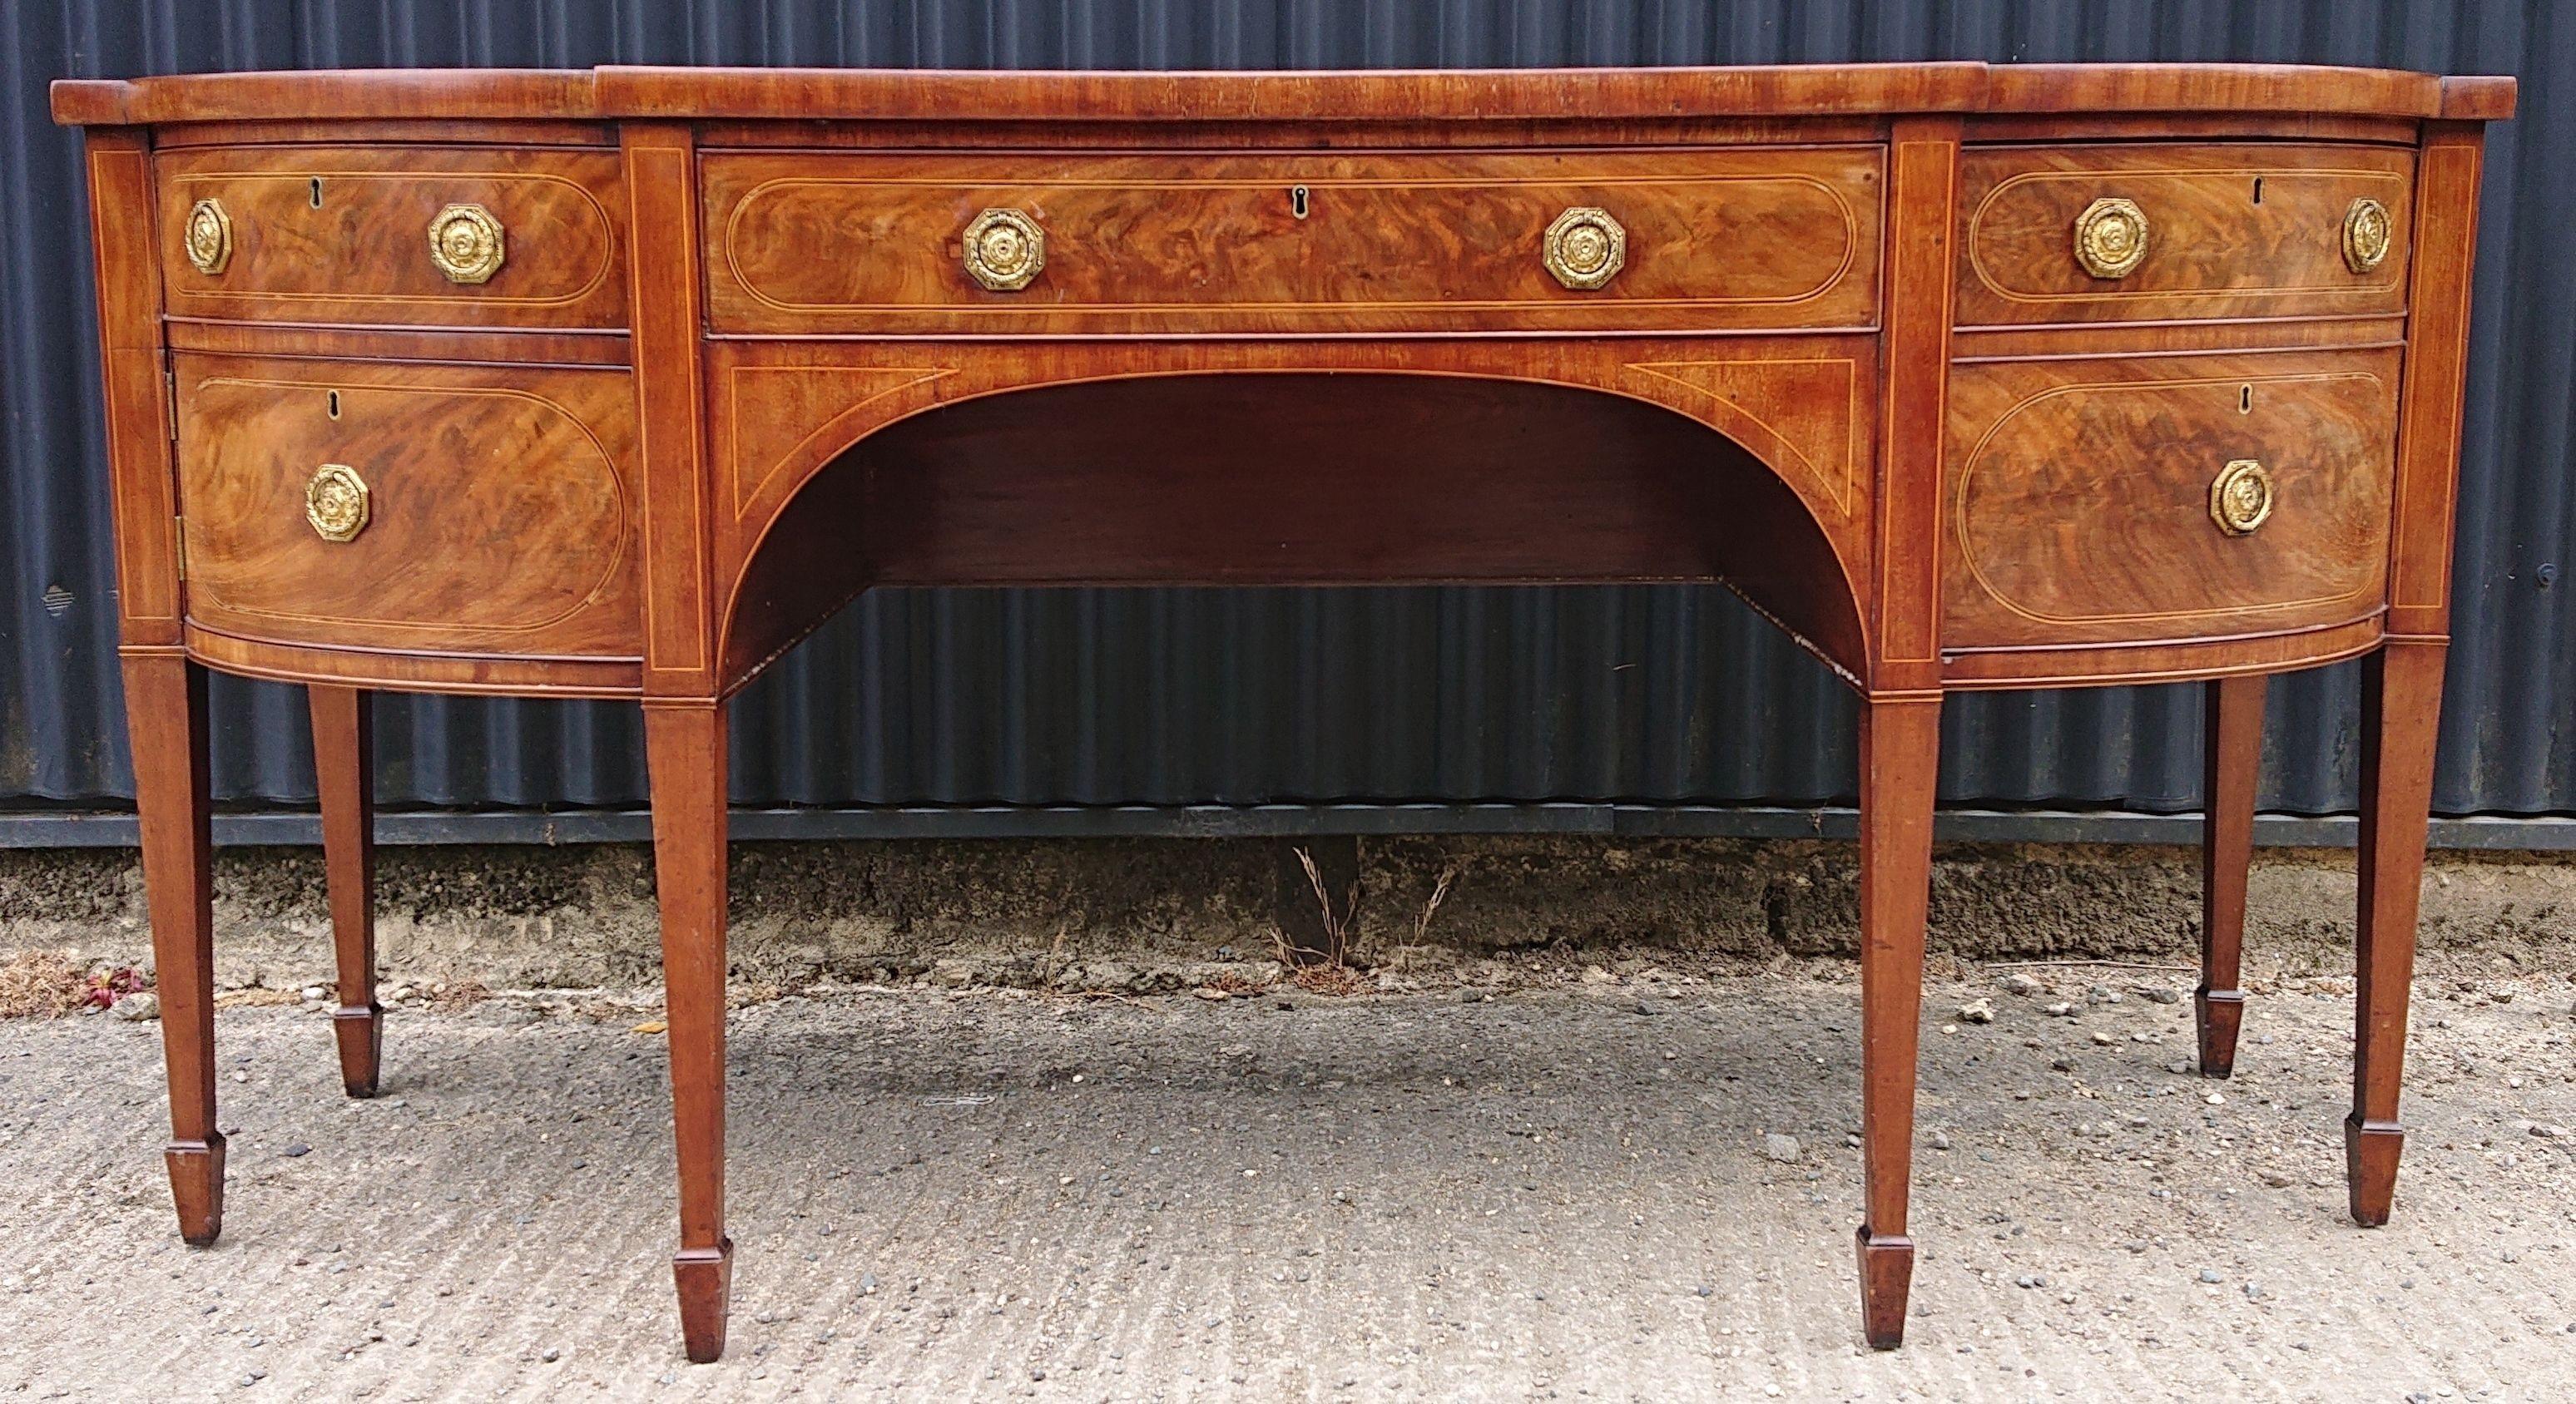 Antique Sideboard George III Period Mahogany In Fair Condition For Sale In Gloucestershire, GB